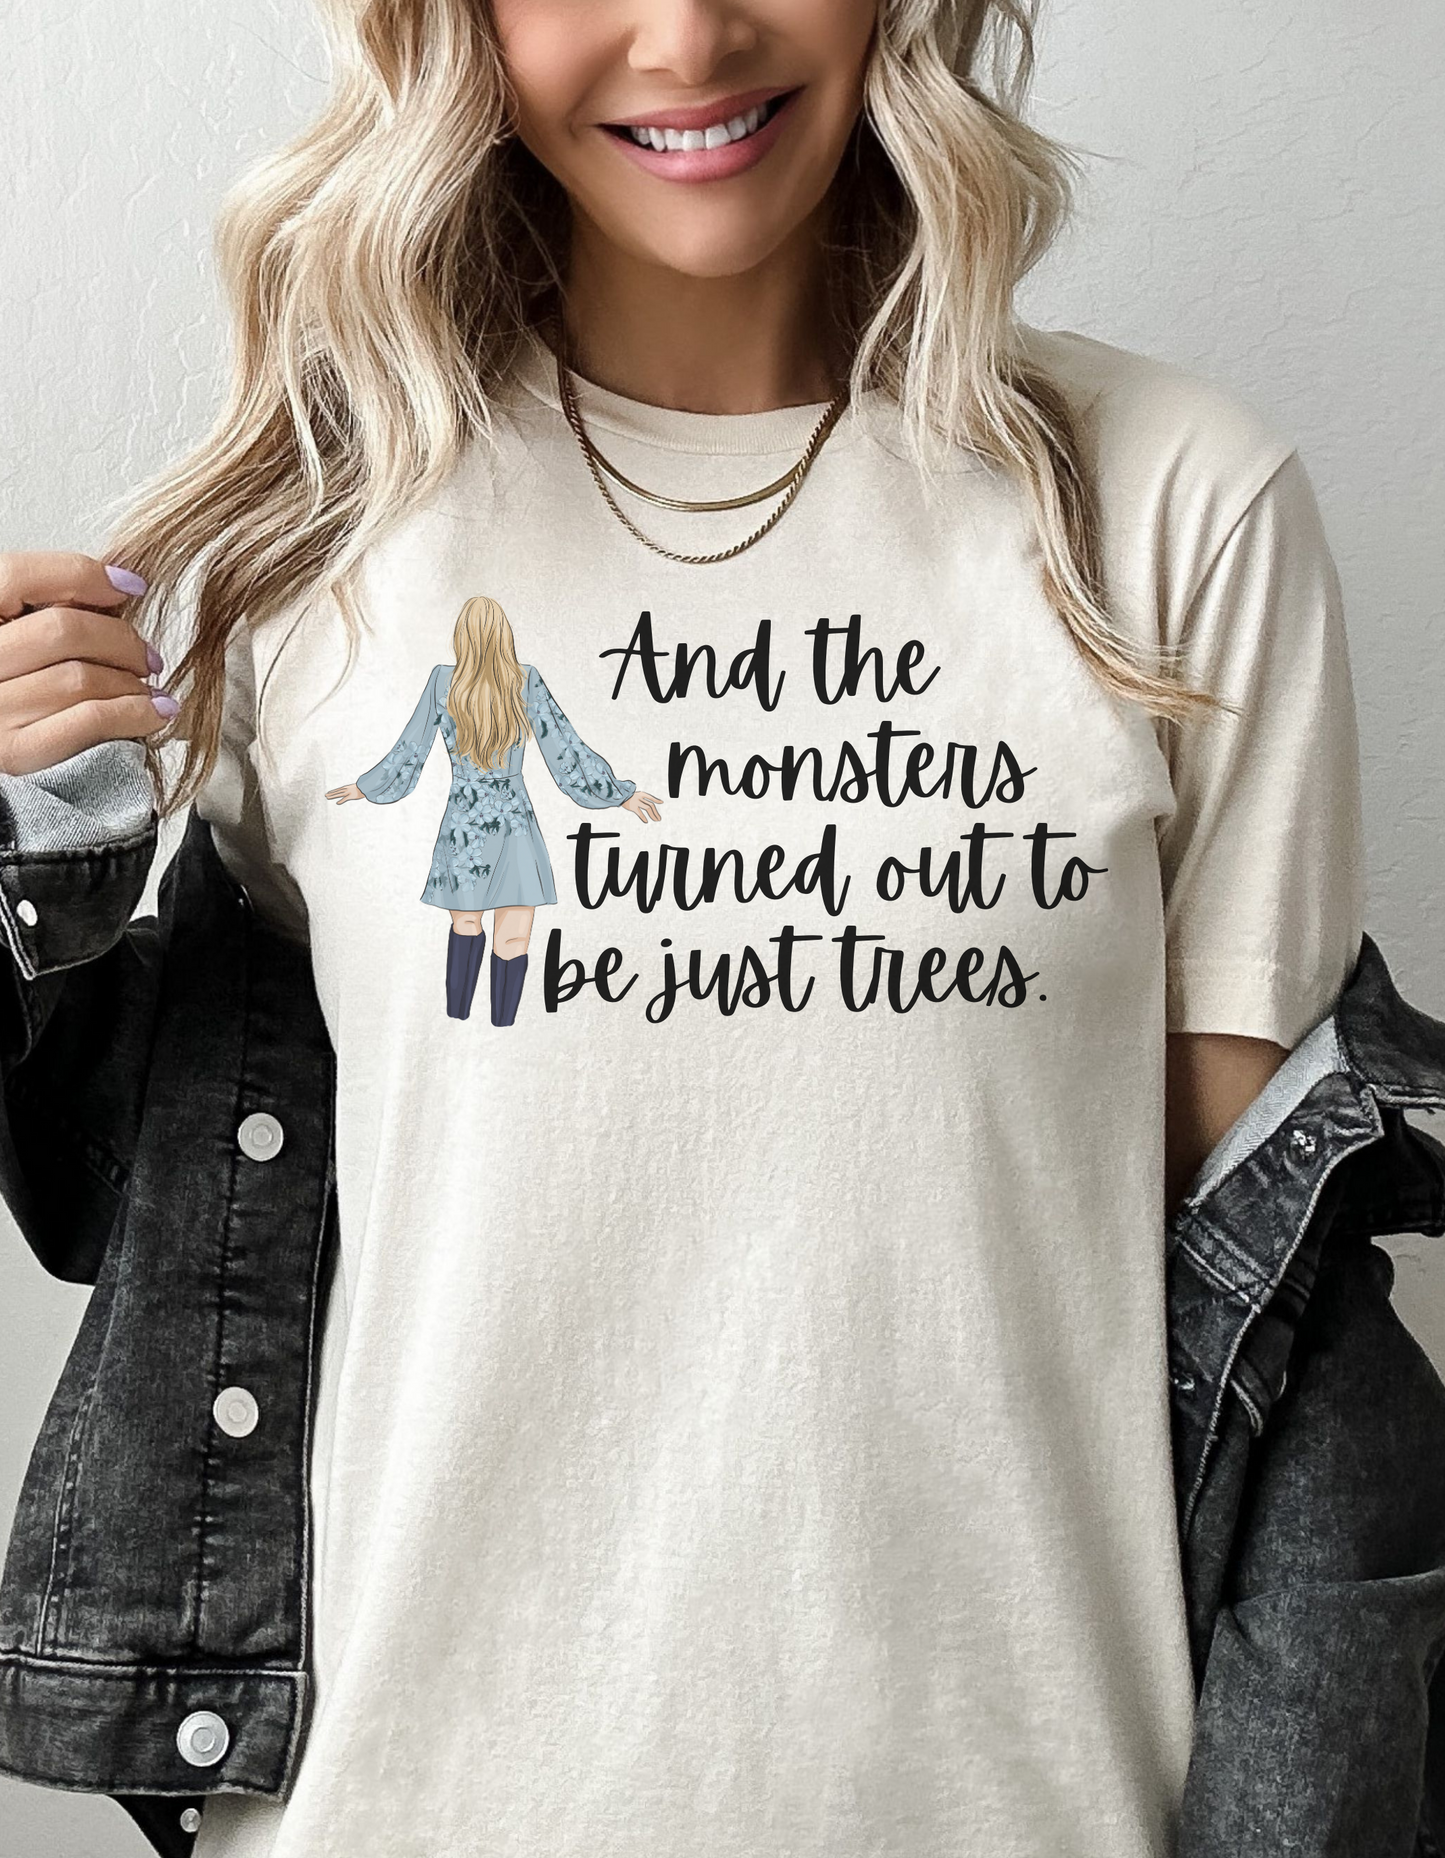 Taylor Swift Preppy Picture T-Shirt - And The Monsters Turned Out To Be Just Trees